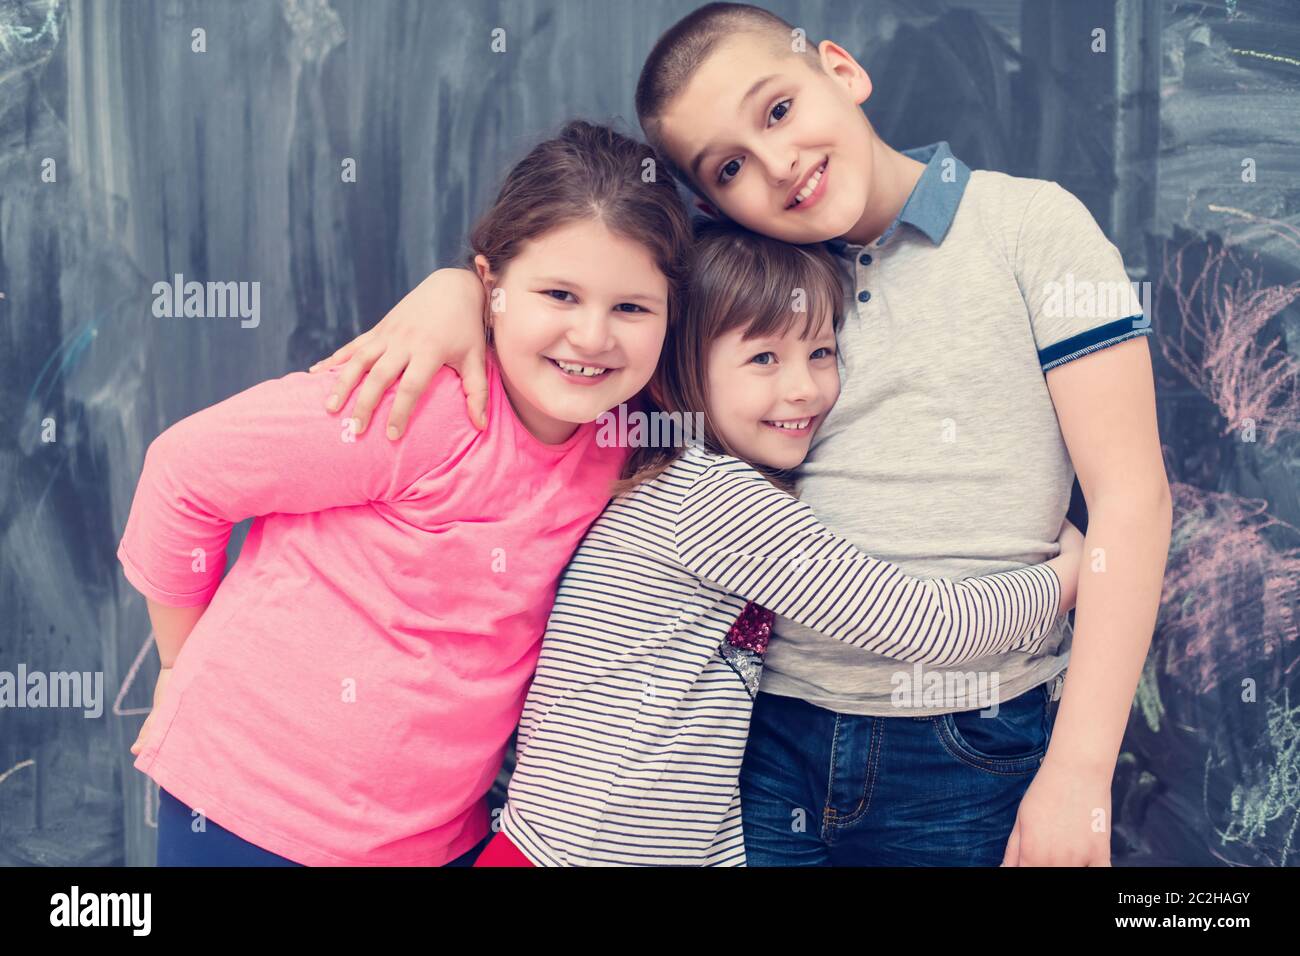 group of kids hugging in front of chalkboard Stock Photo